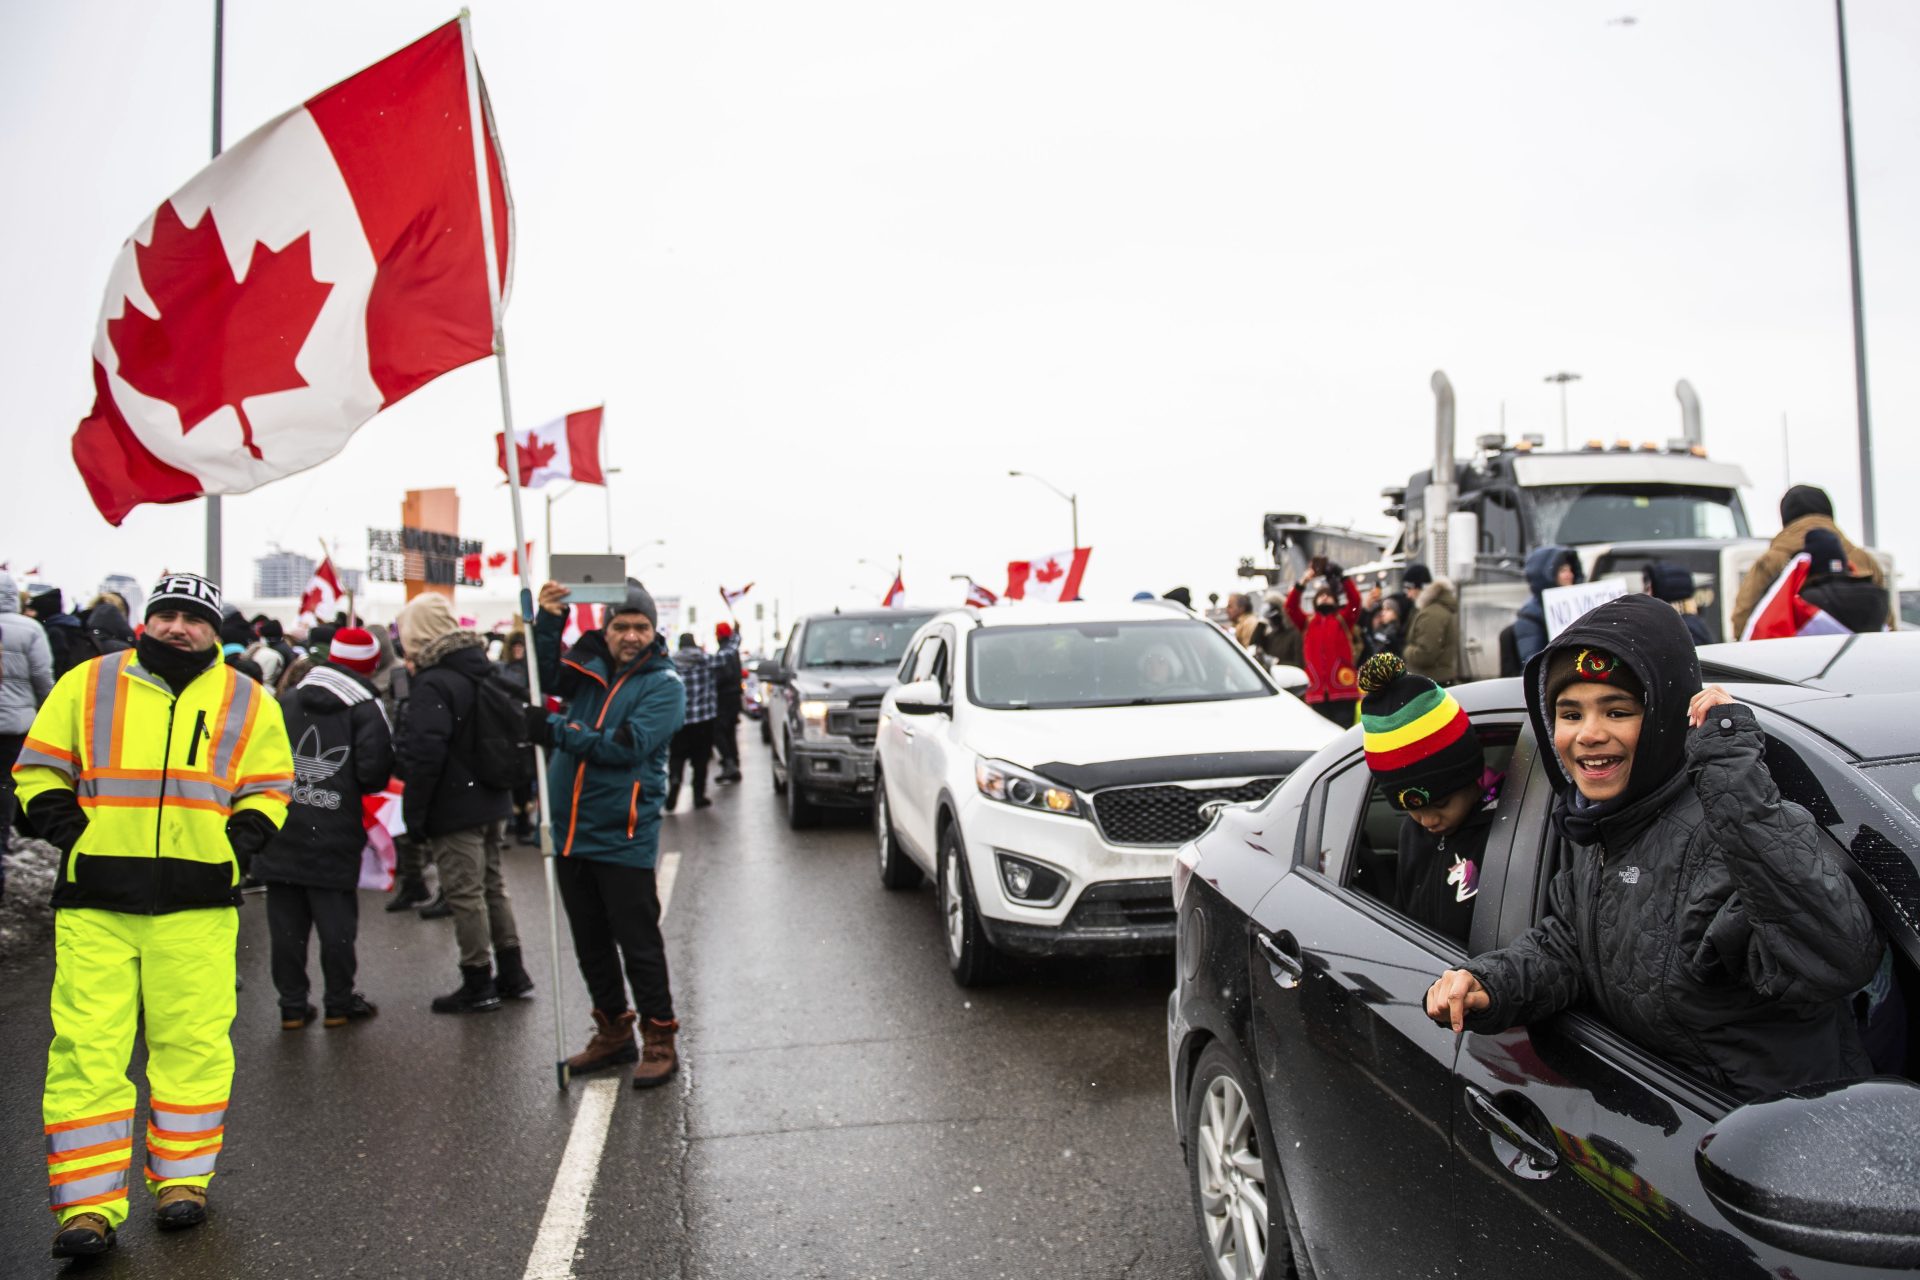 Protestors show their support for the Freedom Convoy of truck drivers who are making their way to Ottawa to protest against COVID-19 vaccine mandates by the Canadian government on Thursday, Jan. 27, 2022, in Vaughan.